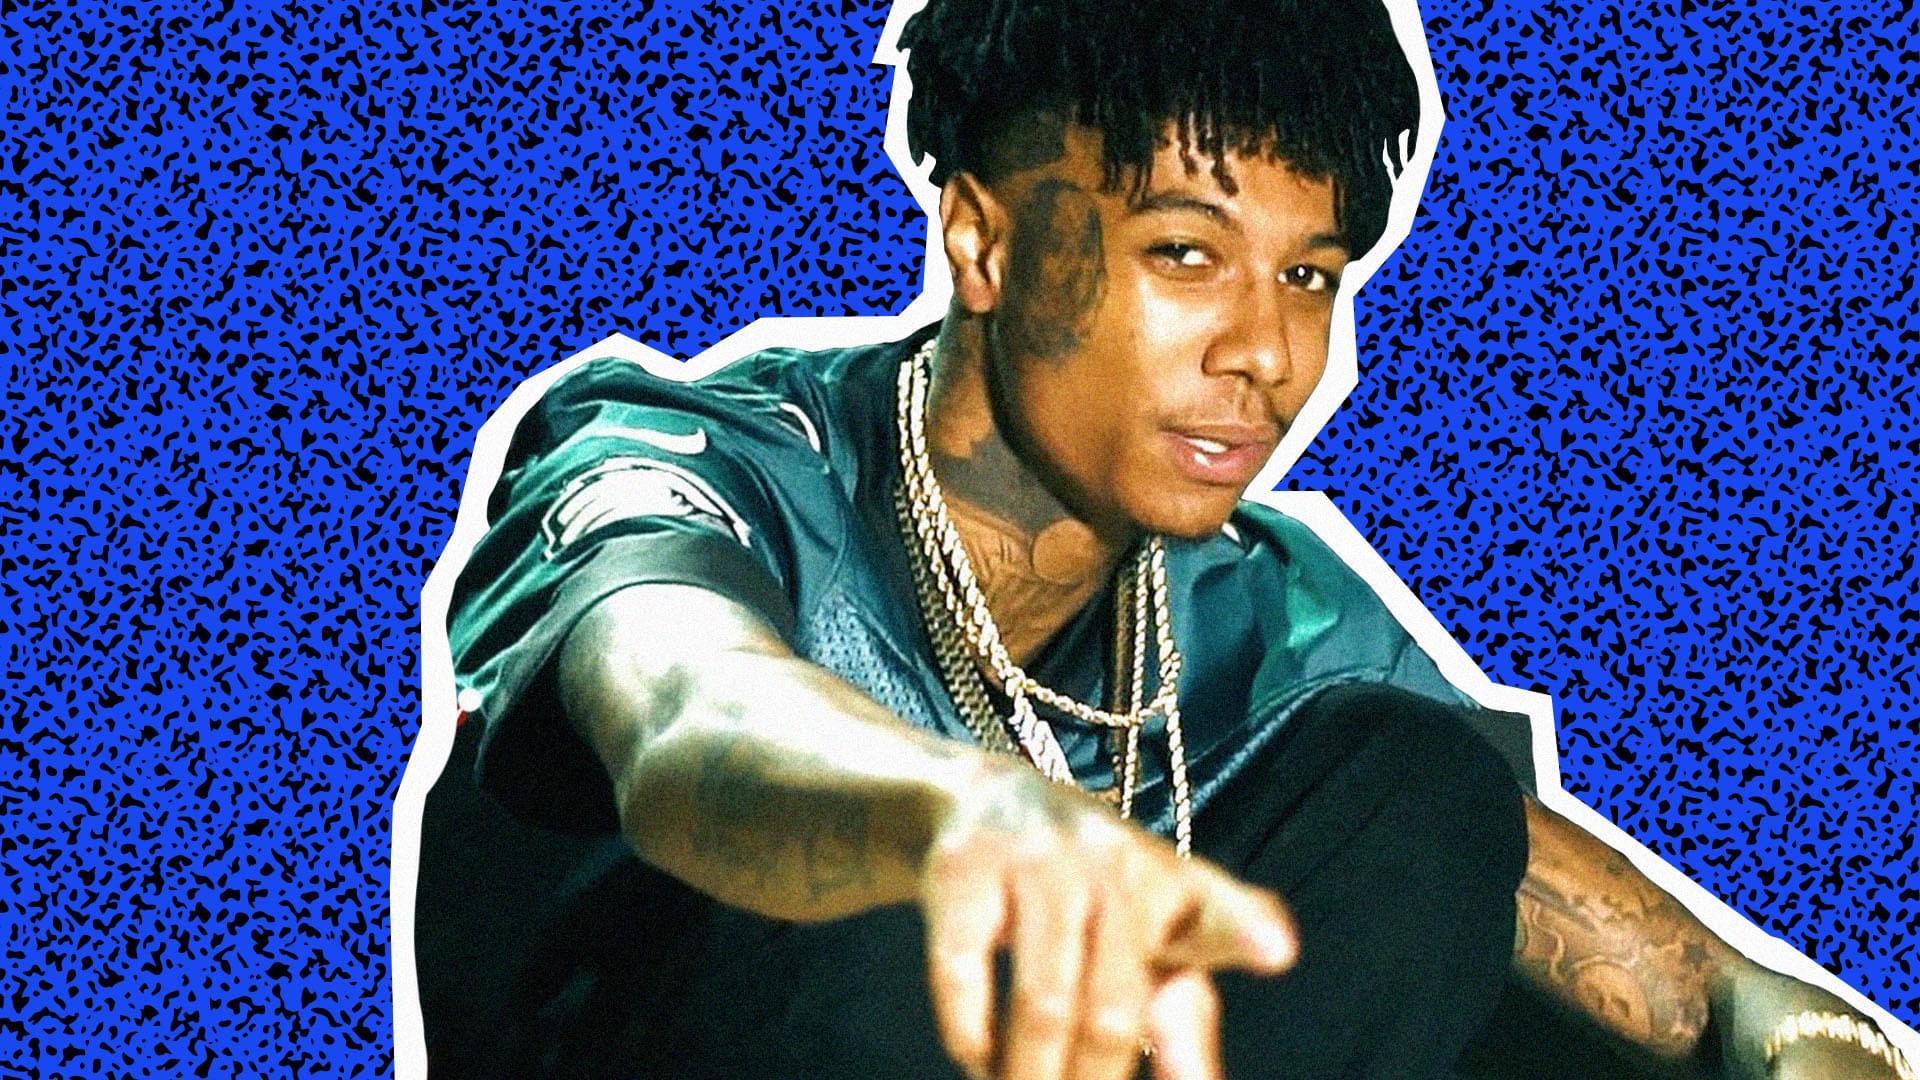 Blueface Wallpapers Top Free Blueface Backgrounds Wallpaperaccess